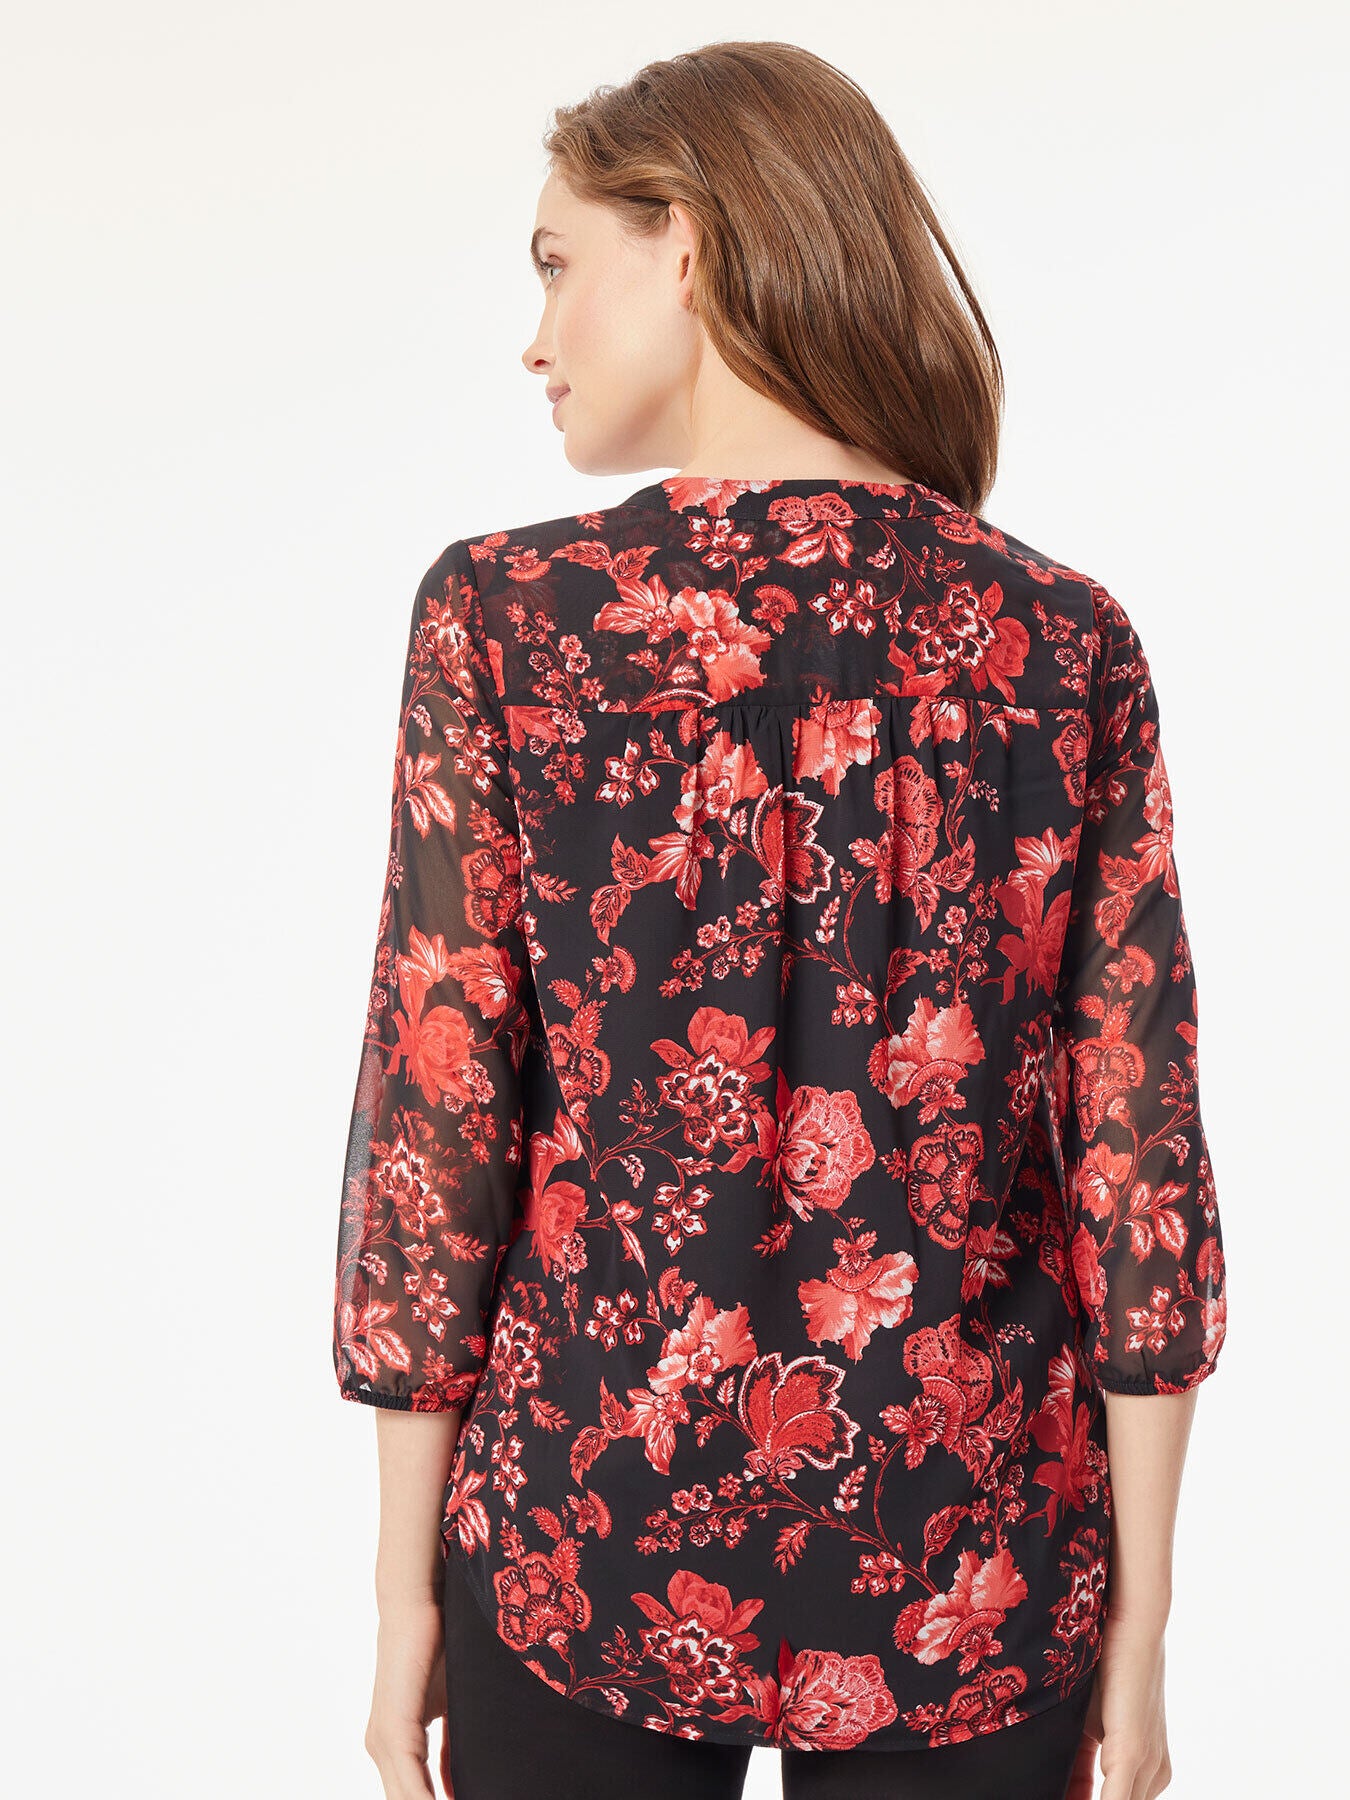 Red Floral V-Neck Blouse Top - Small – Le Prix Fashion & Consulting